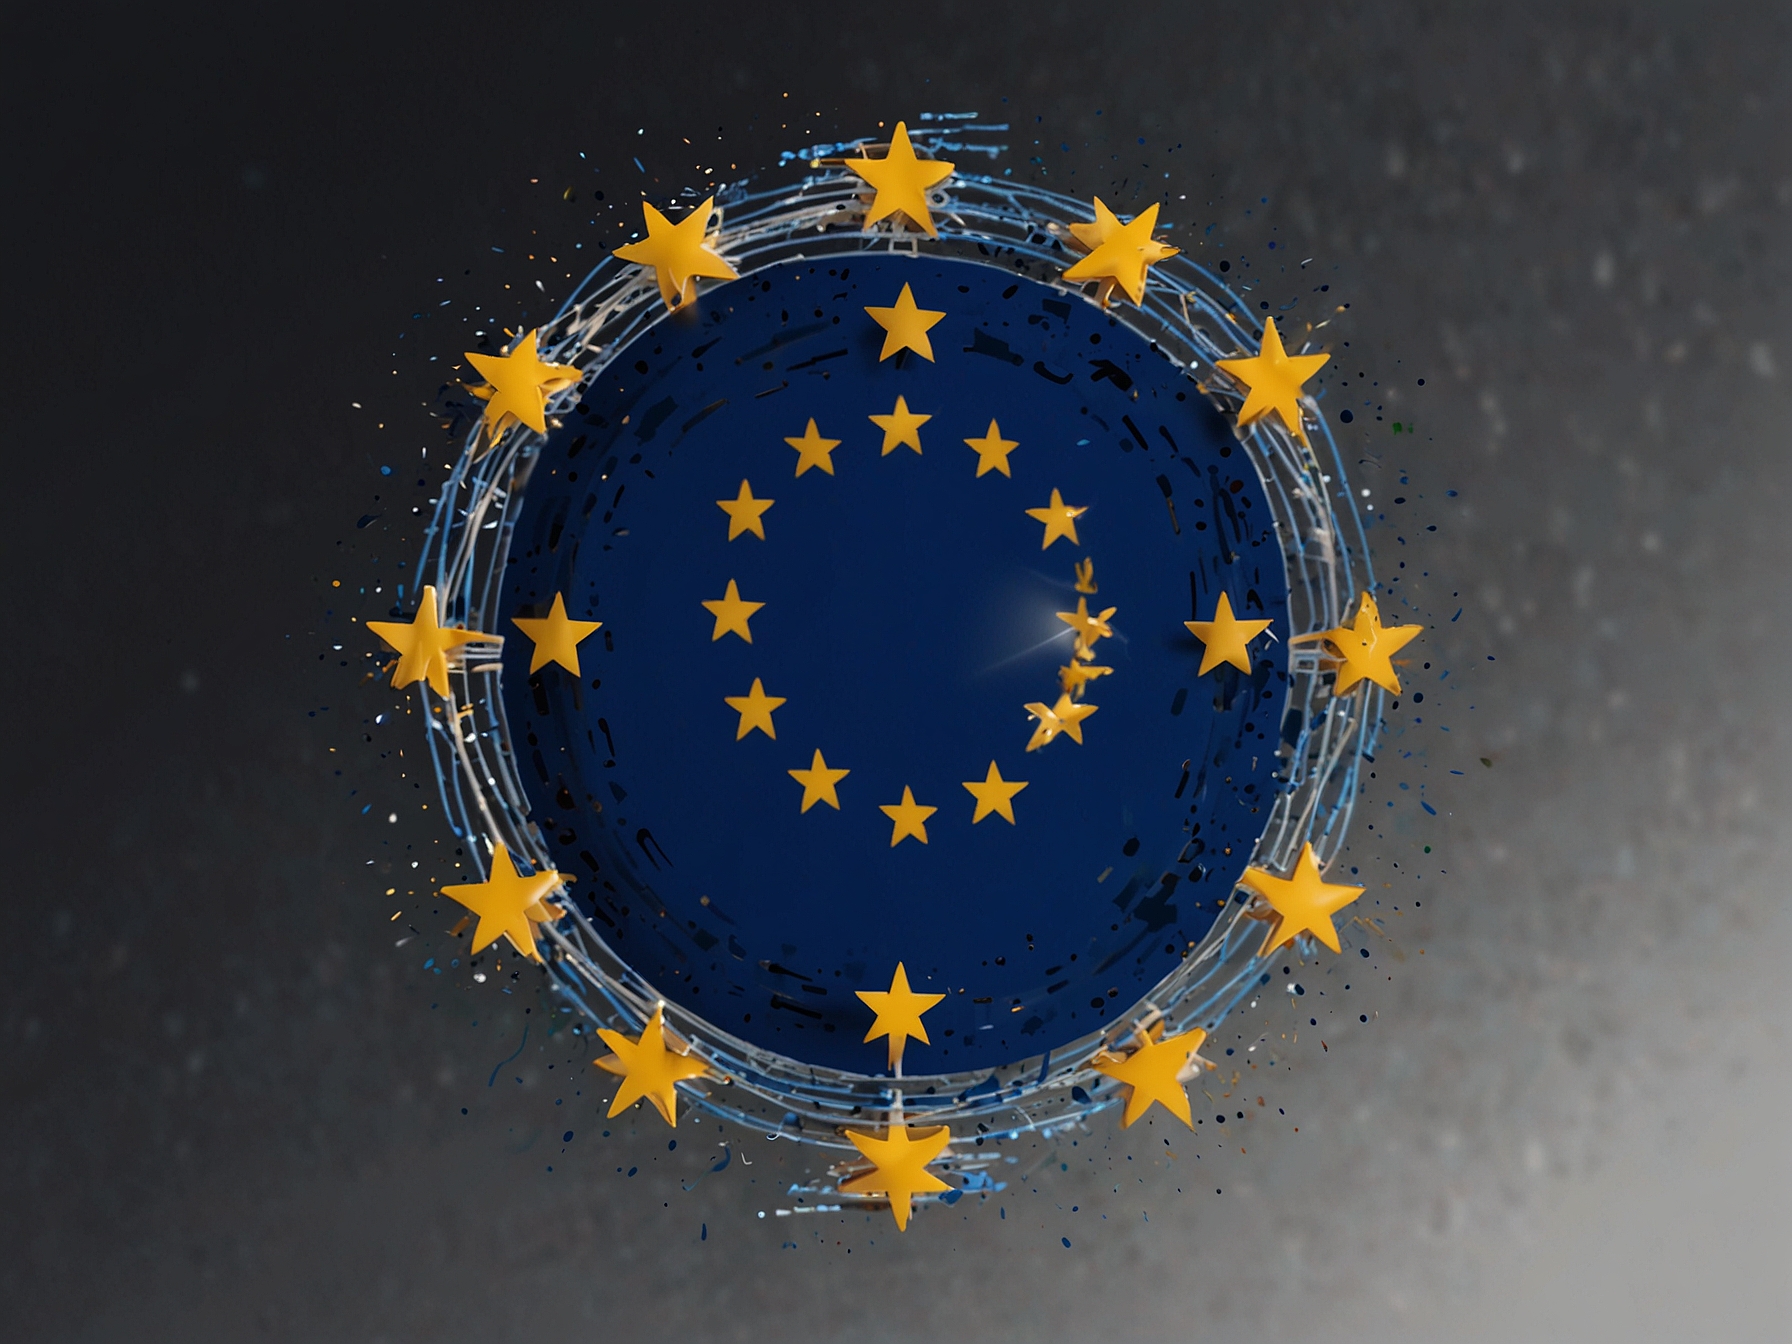 A graphic illustrating the EU flag intertwined with digital data streams, representing the impact of GDPR and tech regulations on AI advancements.